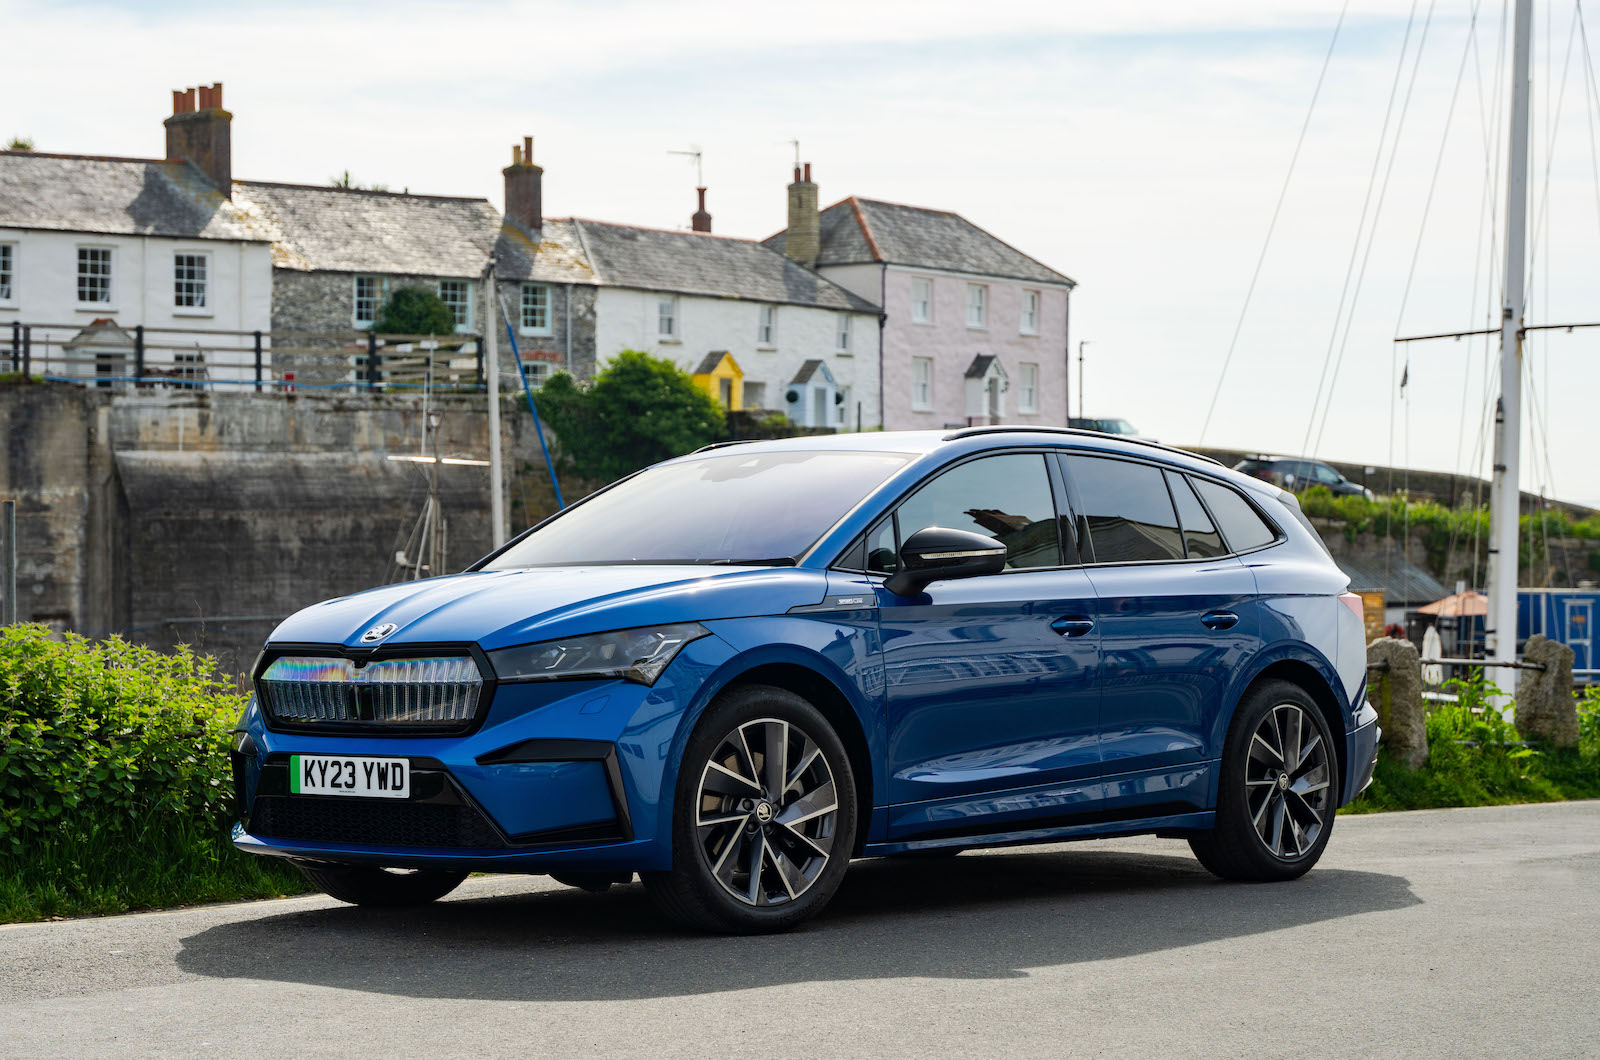 Why the all-electric Skoda Enyaq is an ideal family SUV